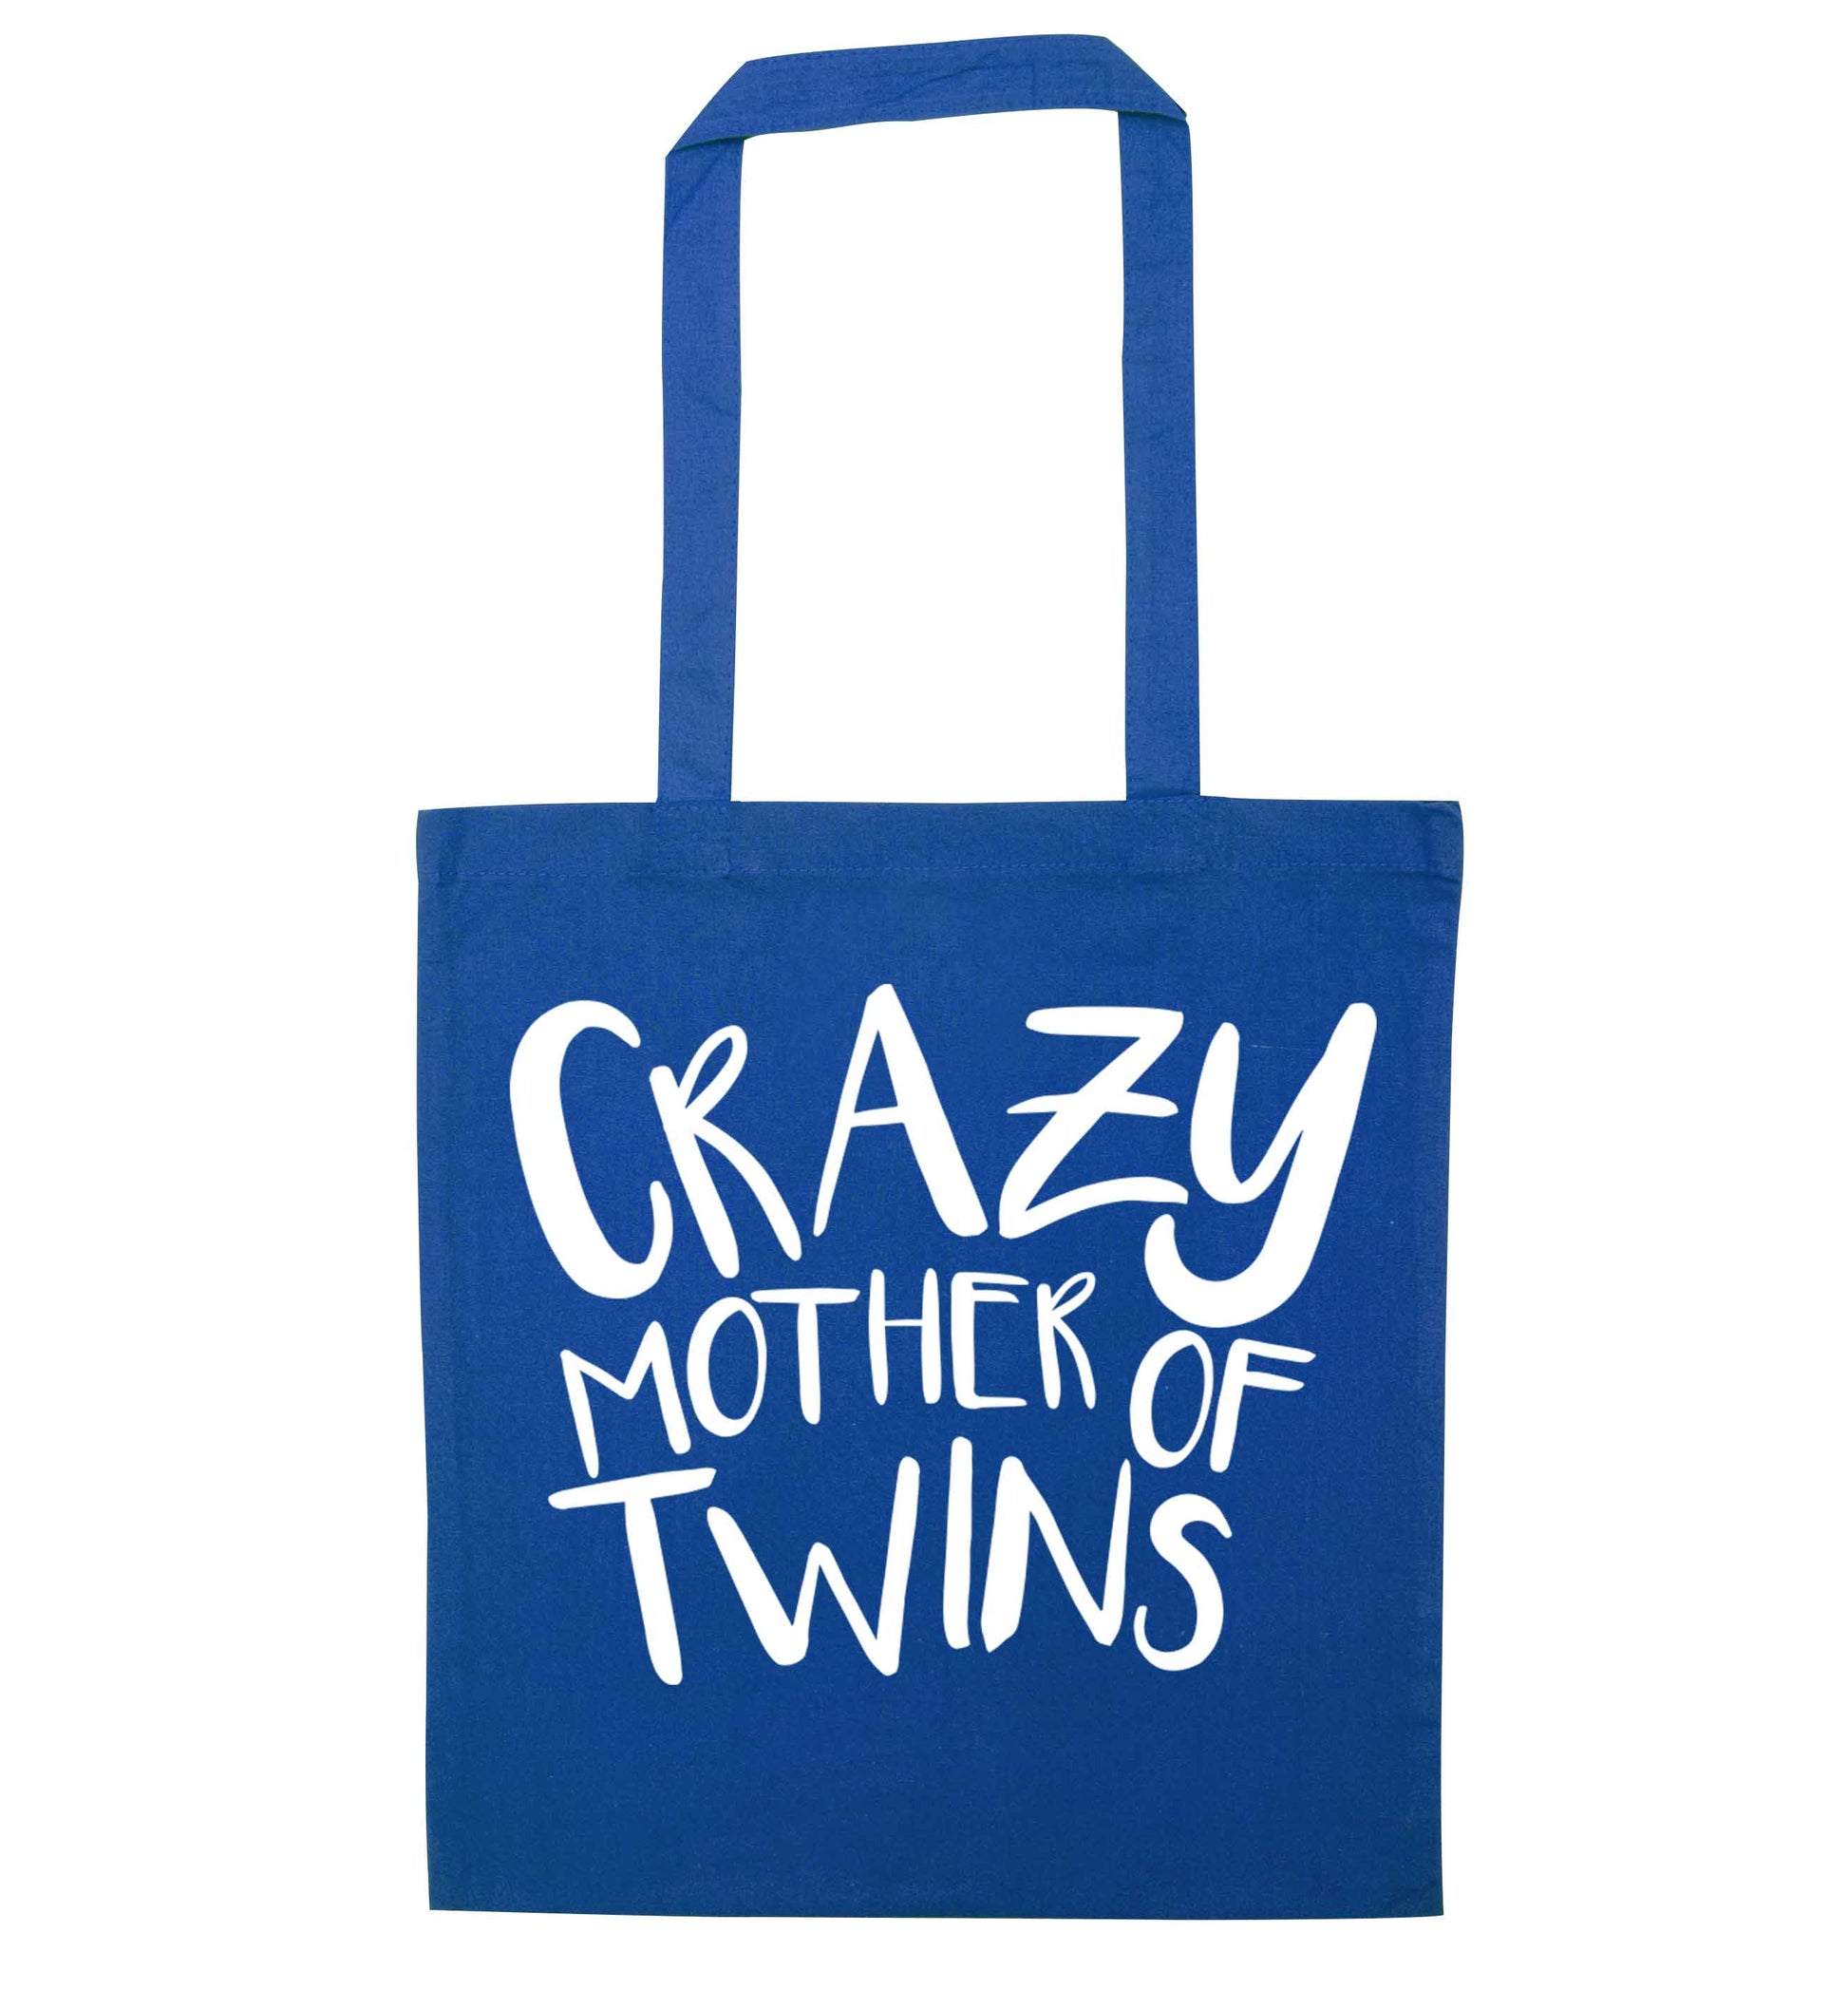 Crazy mother of twins blue tote bag